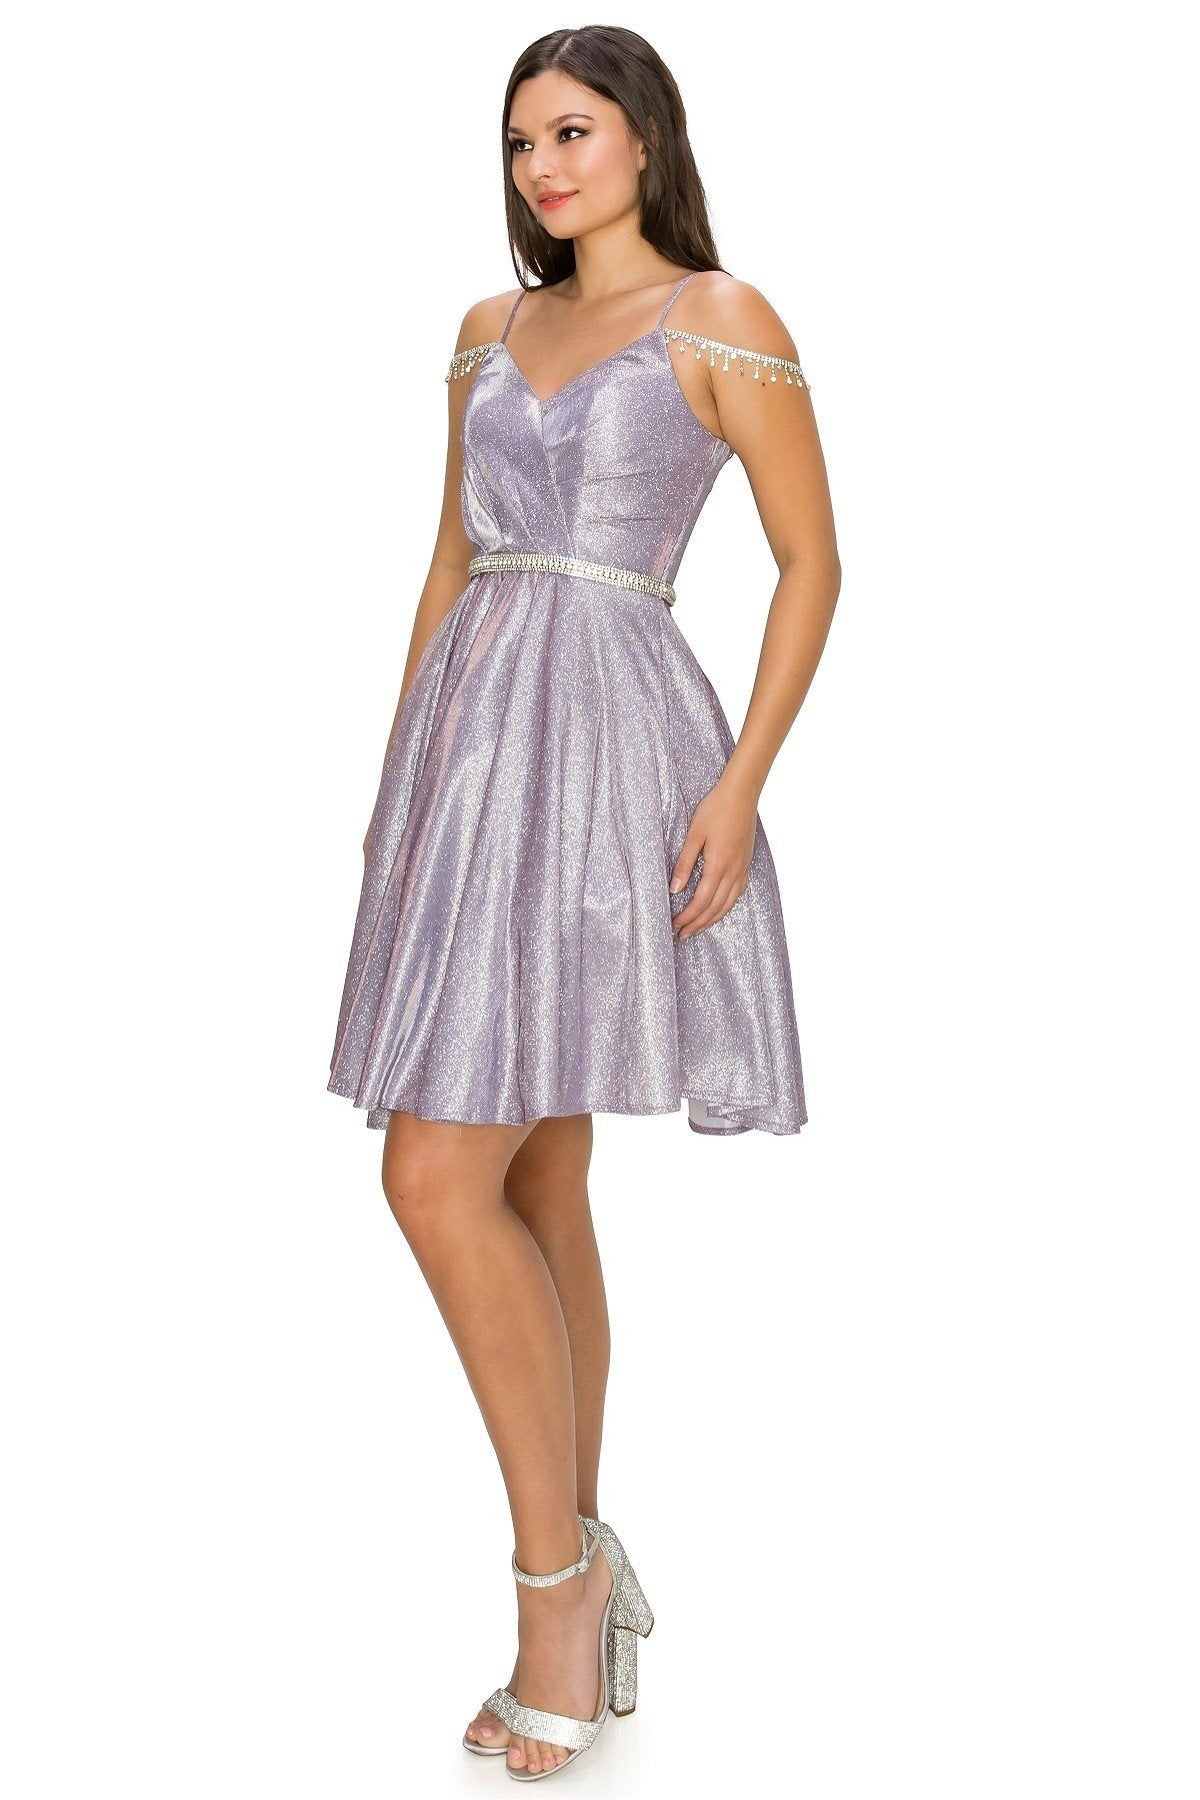 Metallic Short Party Dress by Cinderella Couture USA AS8014J-LILAC